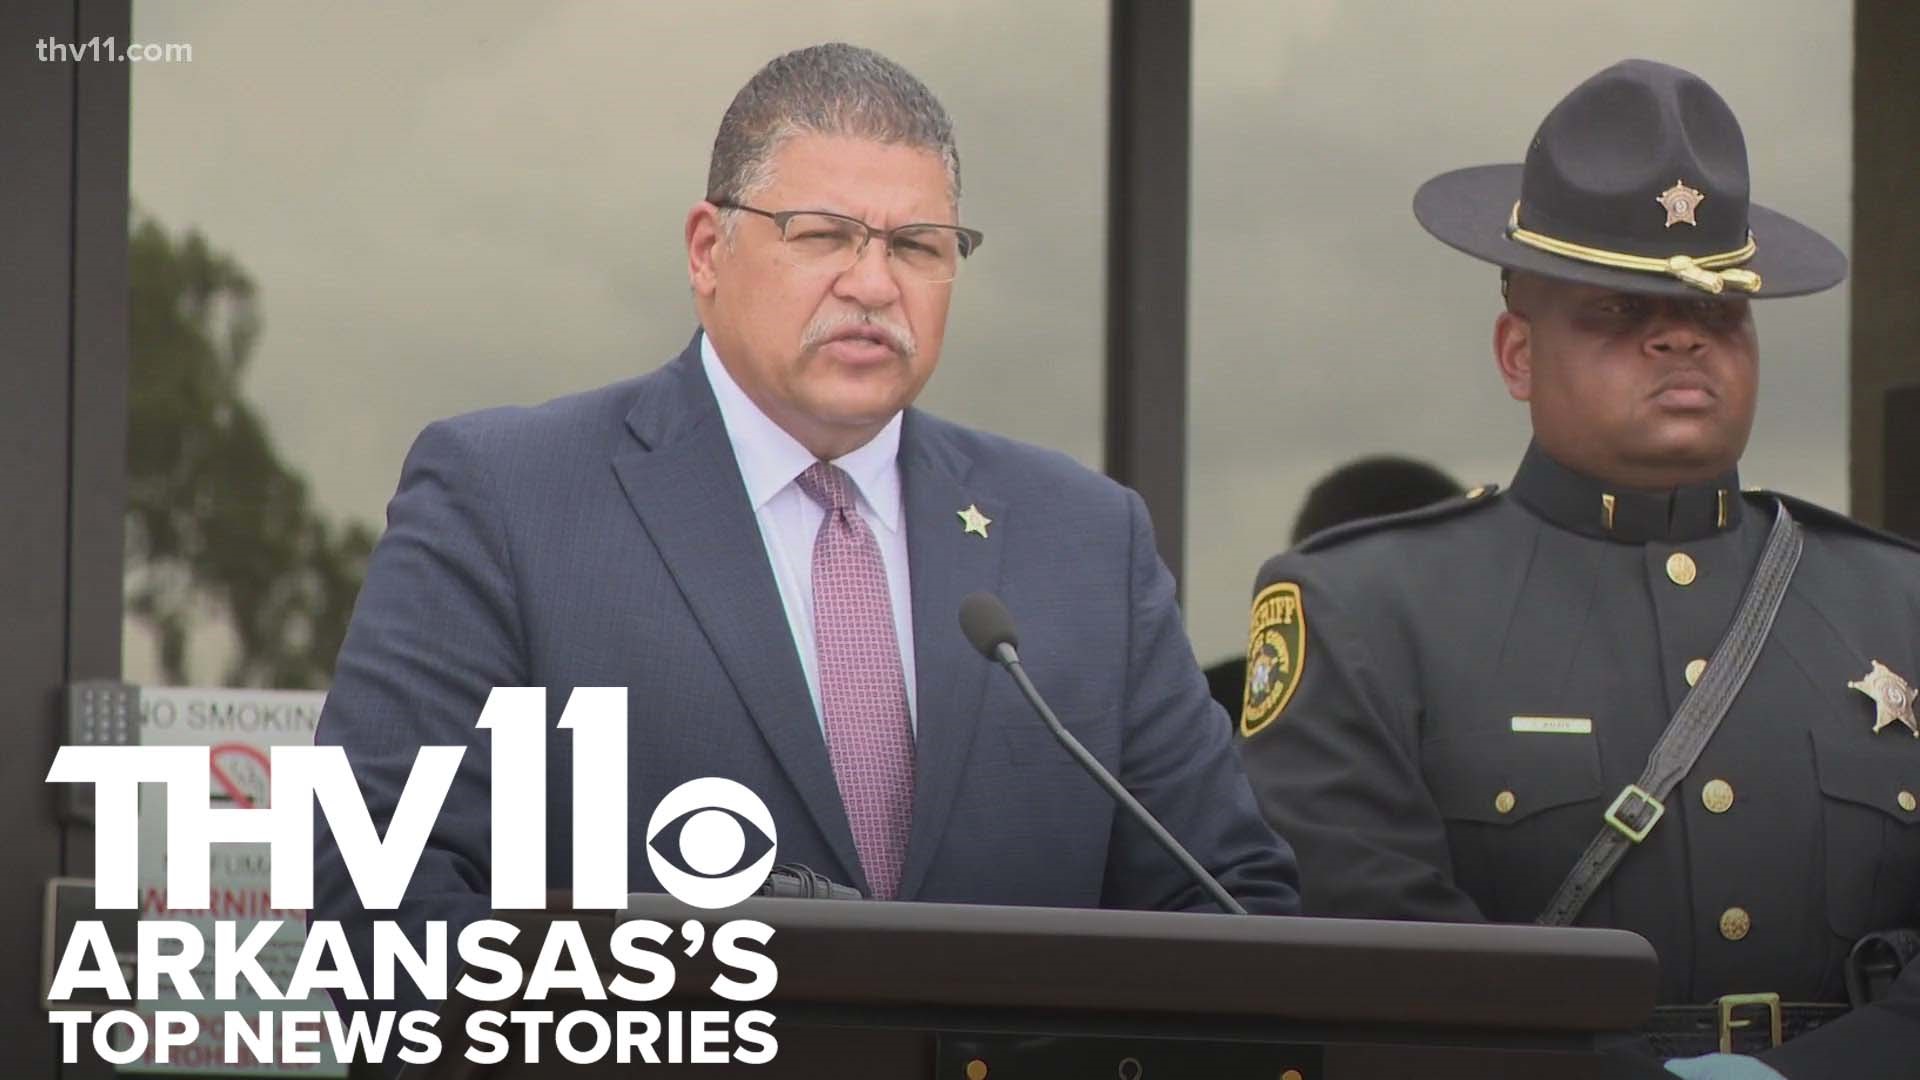 Jurnee Taylor presents Arkansas's top news stories for May 17, 2023, including a new online meditation class at UAMS and honoring officers during Police Week.